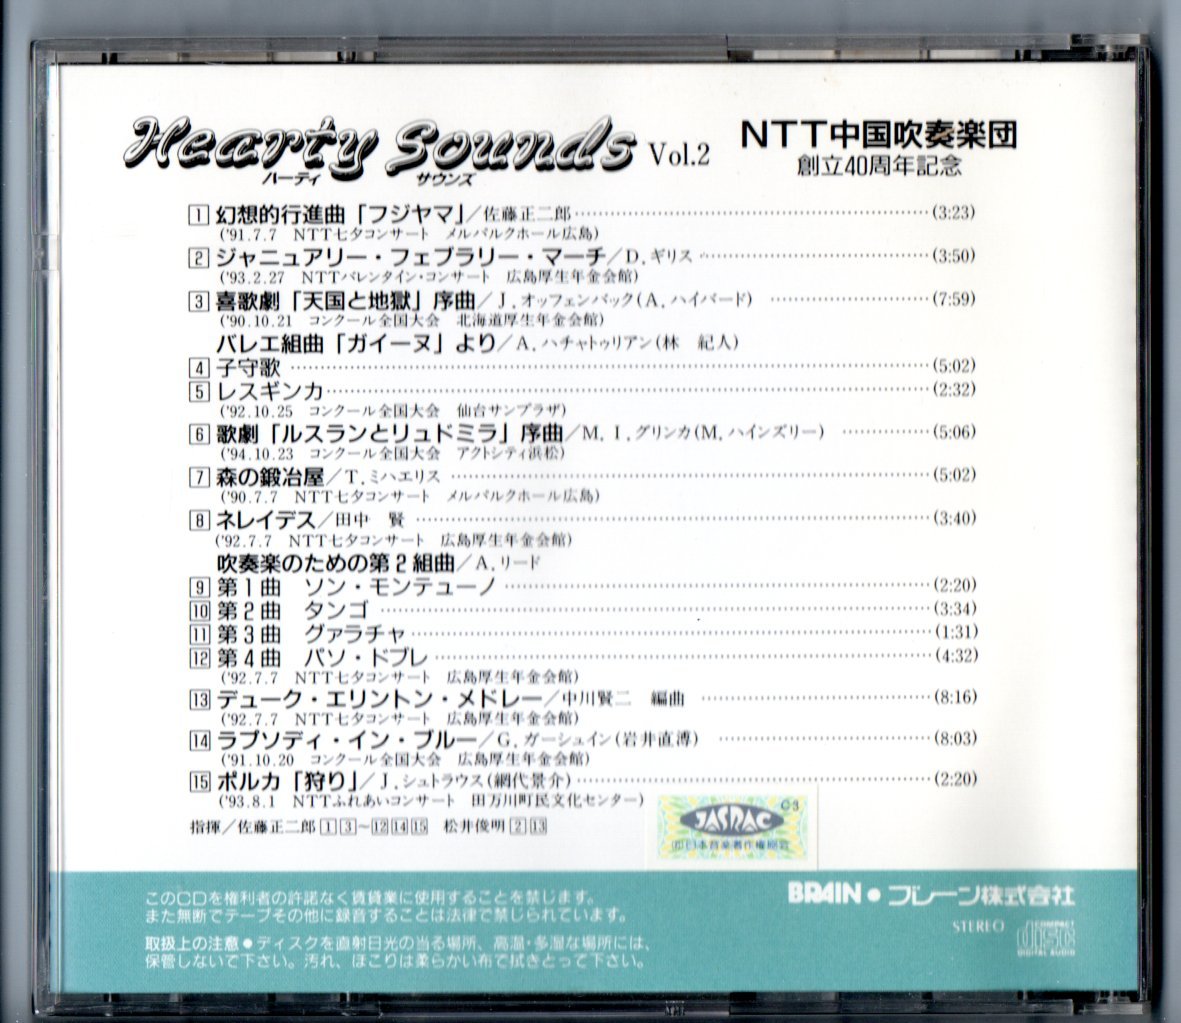  free shipping records out of production CD NTT China wind instrumental music .: is -ti*saunzVol.2..40 anniversary commemoration heaven country . ground .gai-nlapsoti* in * blue ne Ray tes